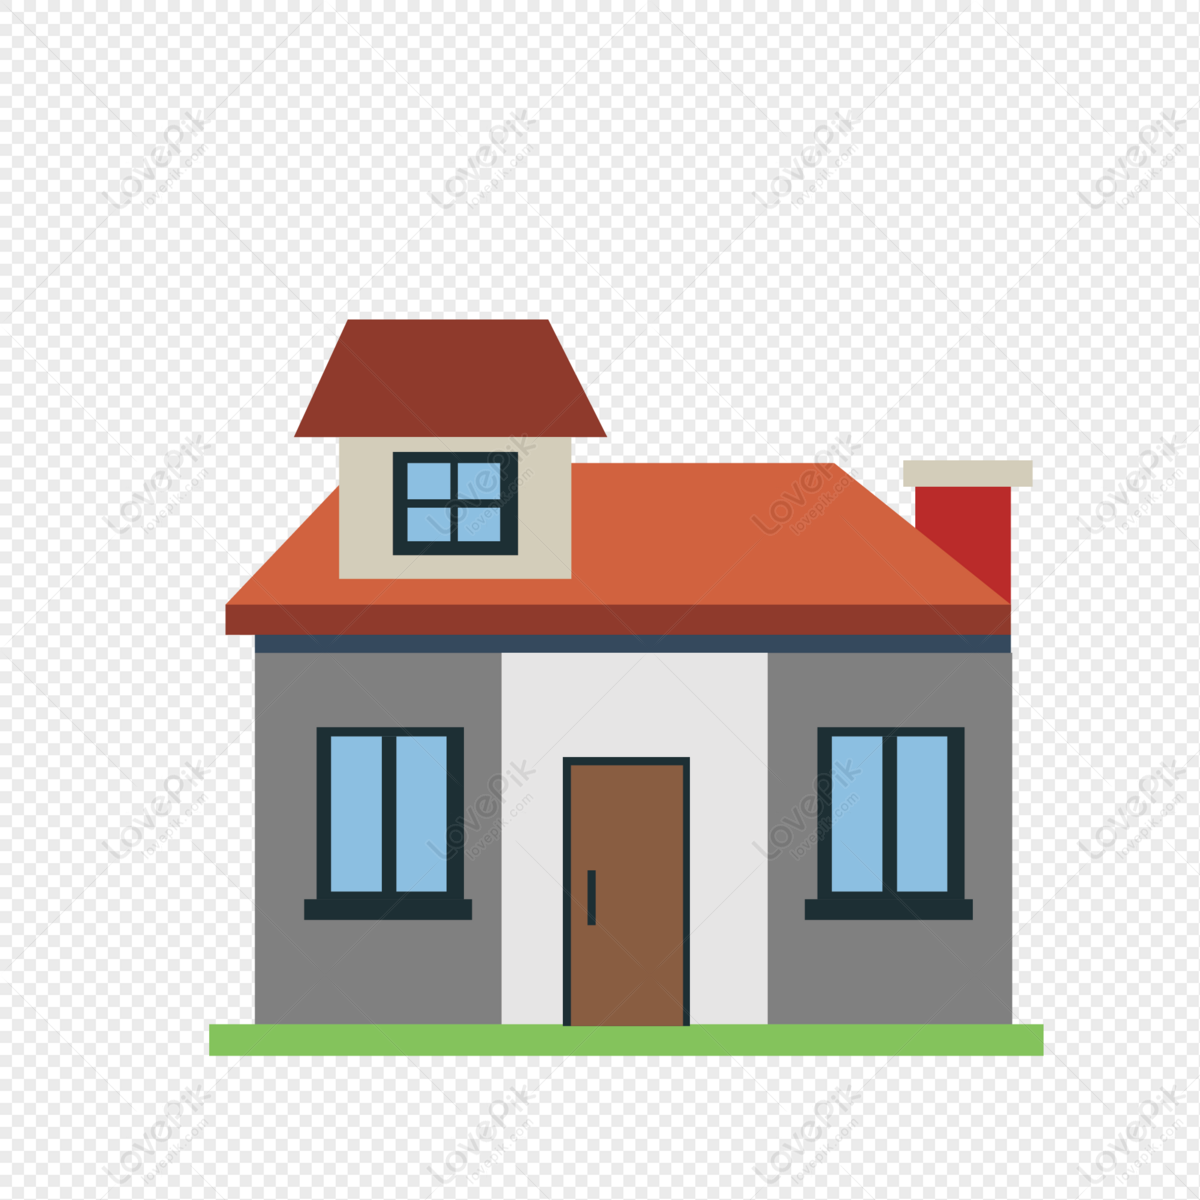 European House PNG Transparent And Clipart Image For Free Download ...